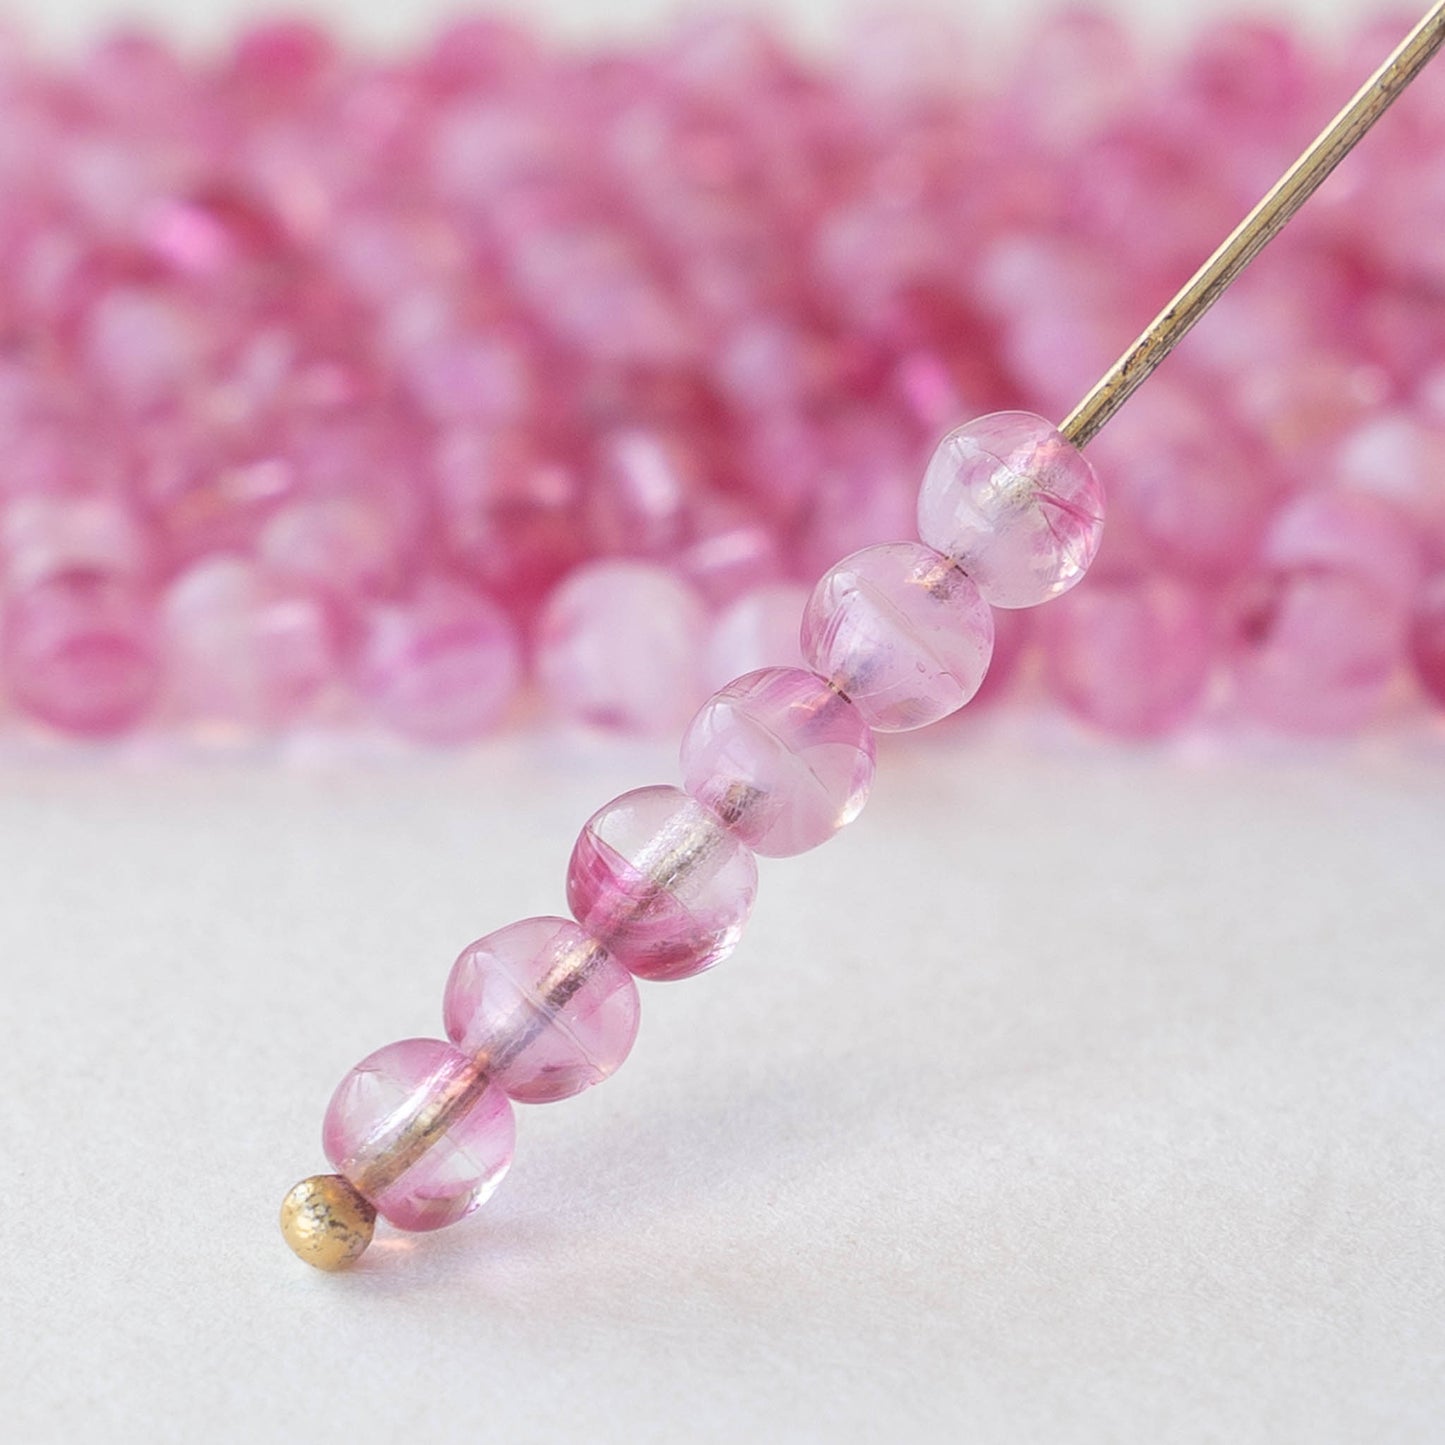 36 6mm x 8mm Pink Crystal Faceted Rondelle Beads by Smileyboy | Michaels